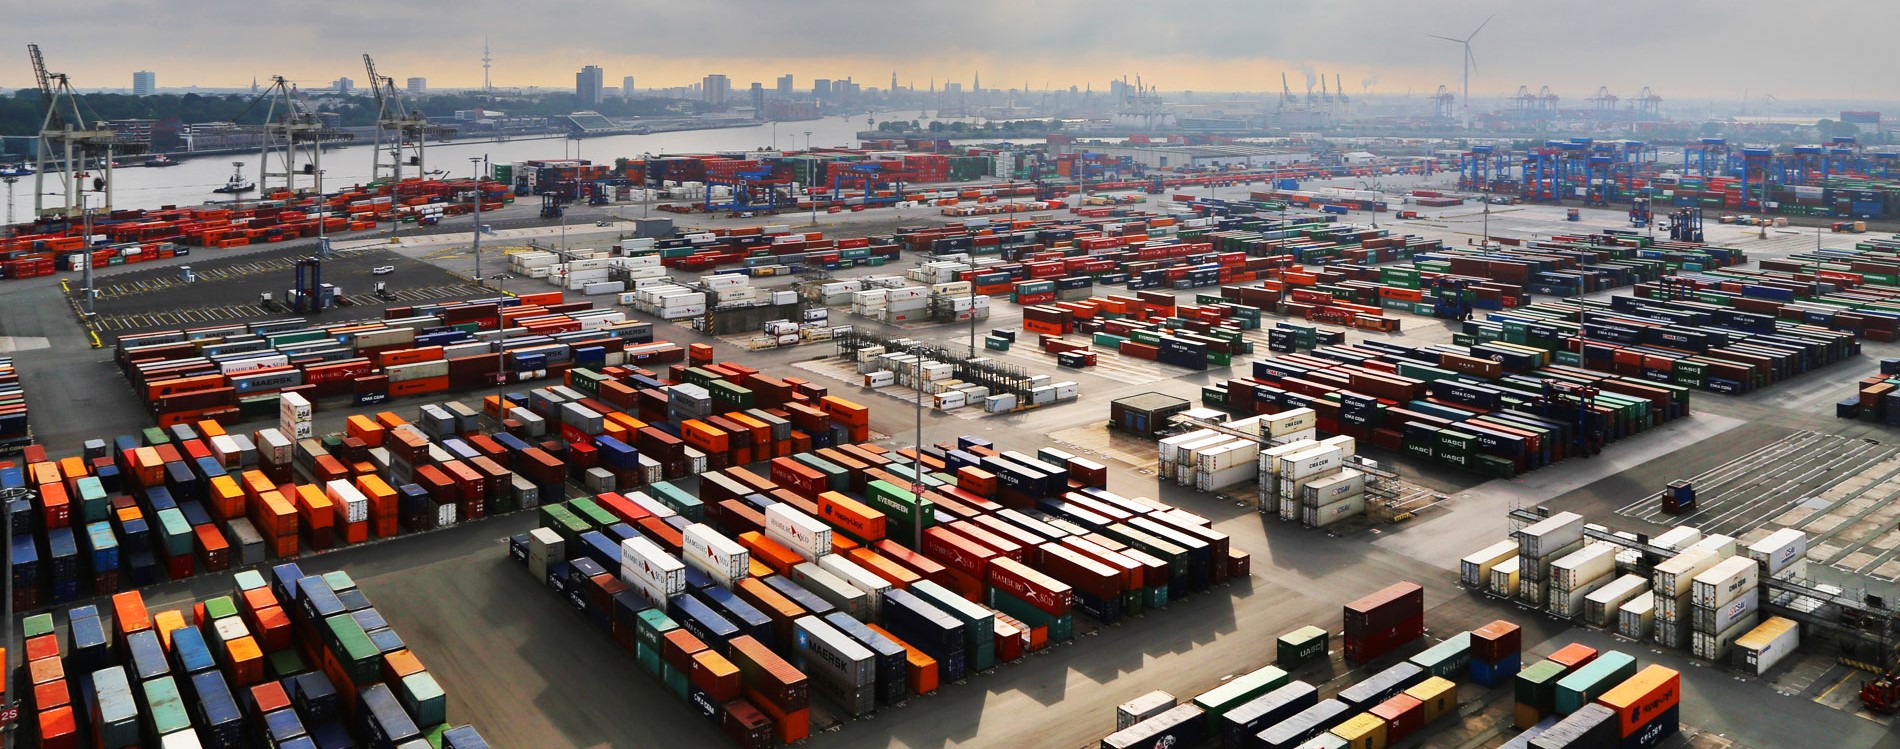 Business - The Hamburg Container Port 